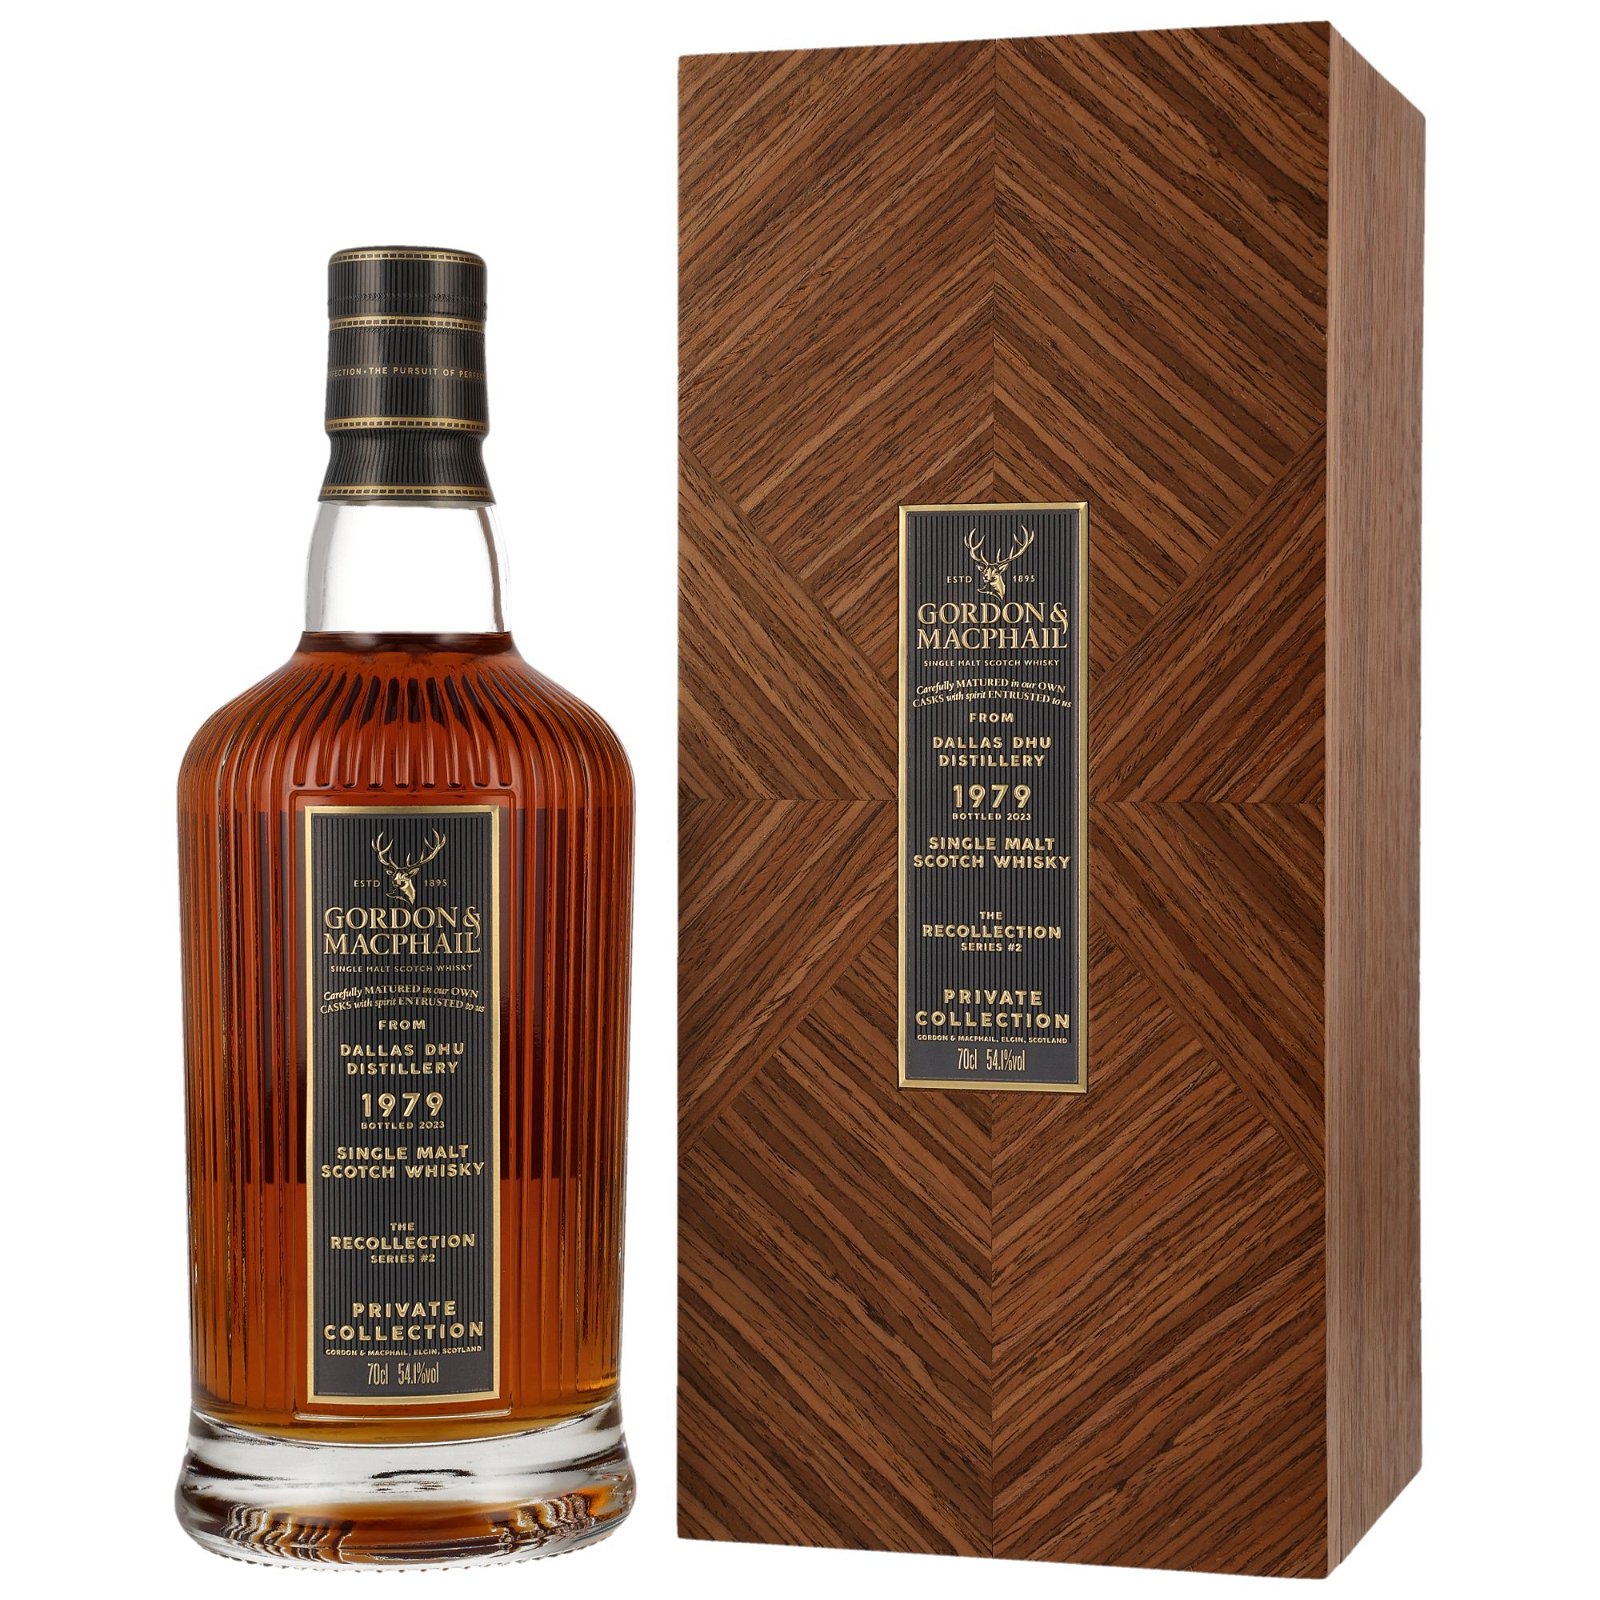 Dallas Dhu 1979/2023 Single Cask No. 1404 The Recollection Series #2 Private Collection (Gordon & MacPhail)